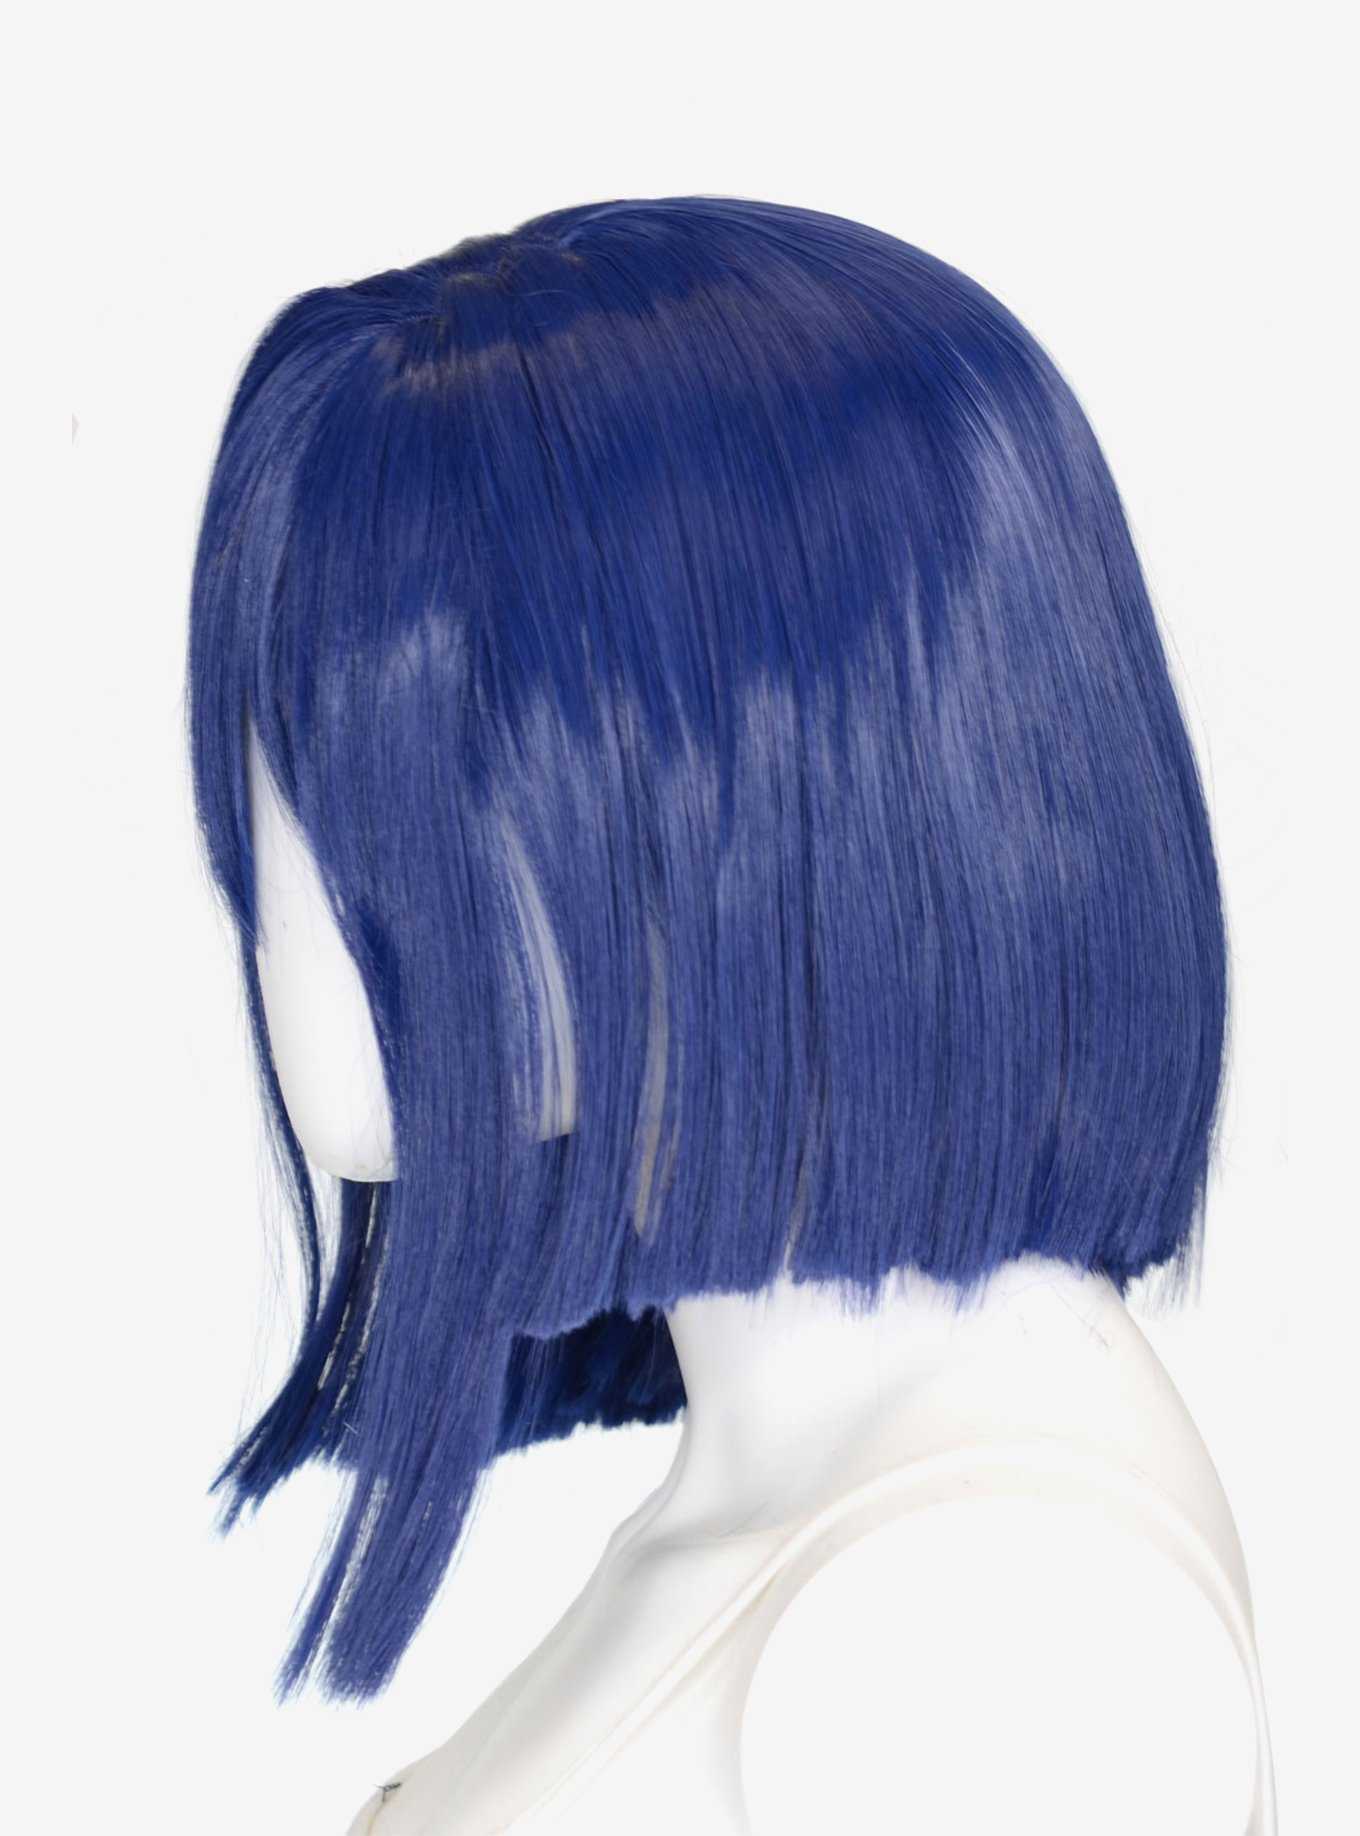 Epic Cosplay Official Licensed Darling in the Franxx Ichigo Wig, , hi-res